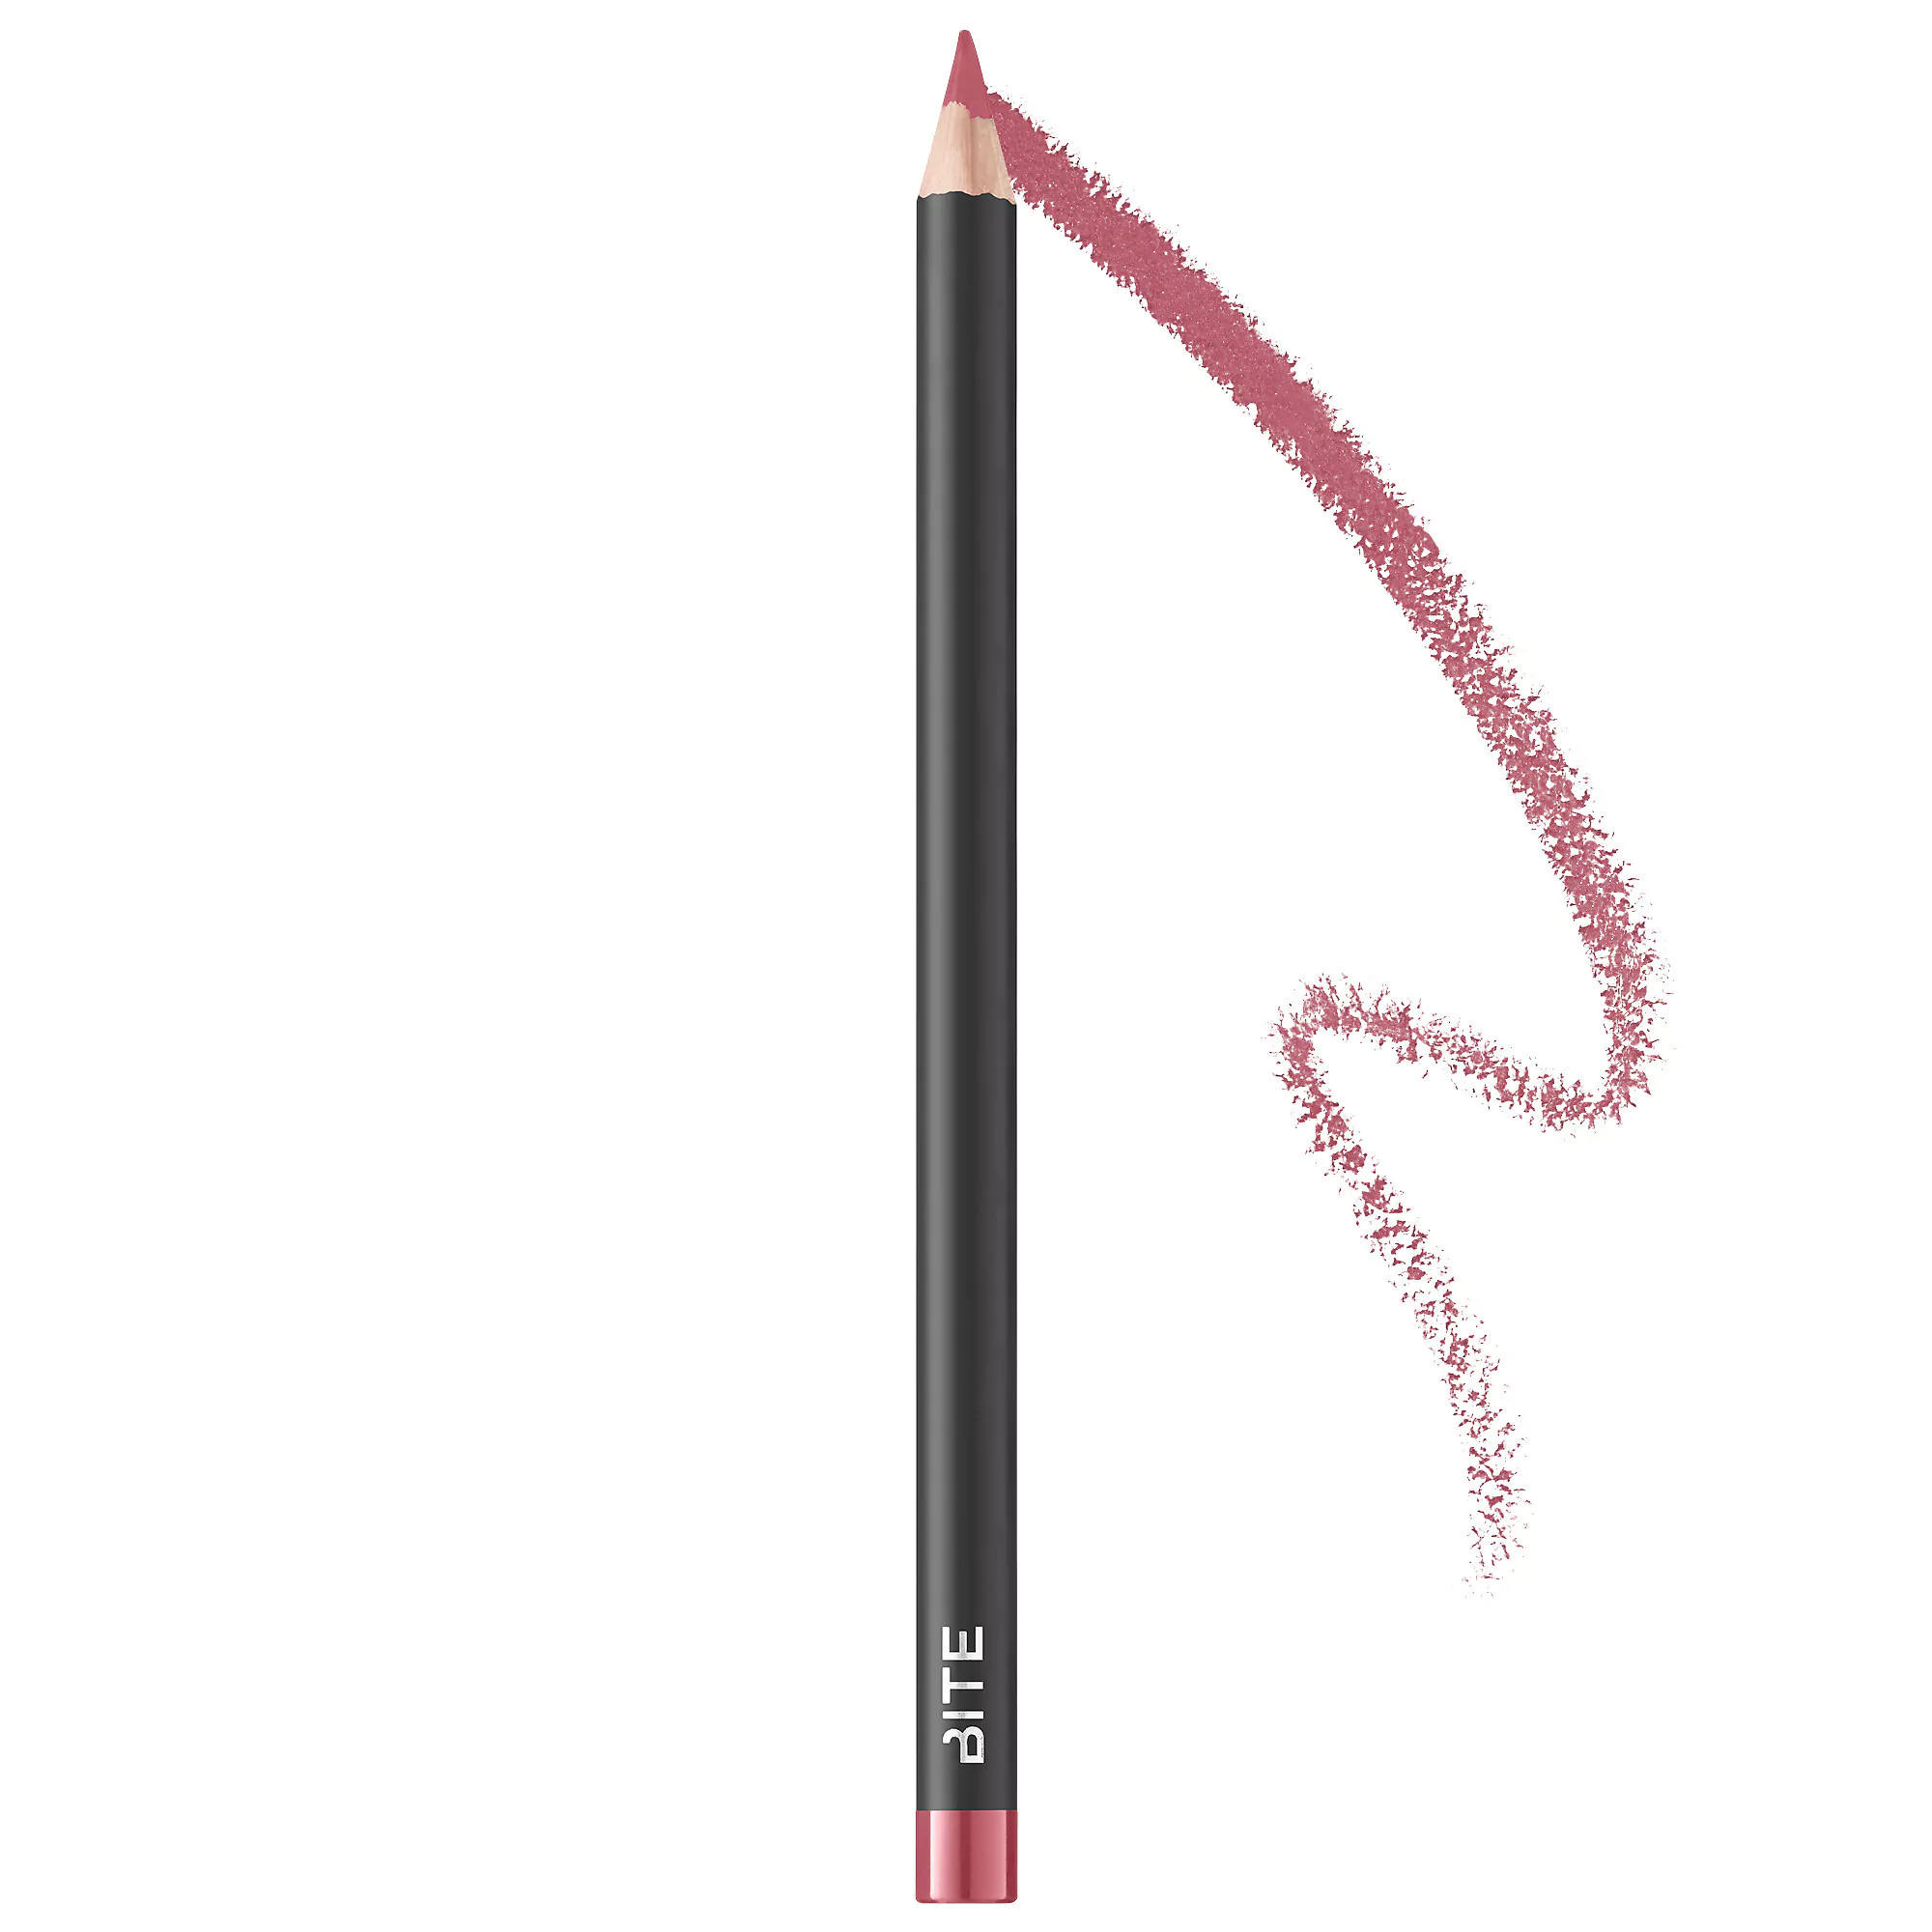 Bite Beauty The Lip Pencil Nude Pink 002